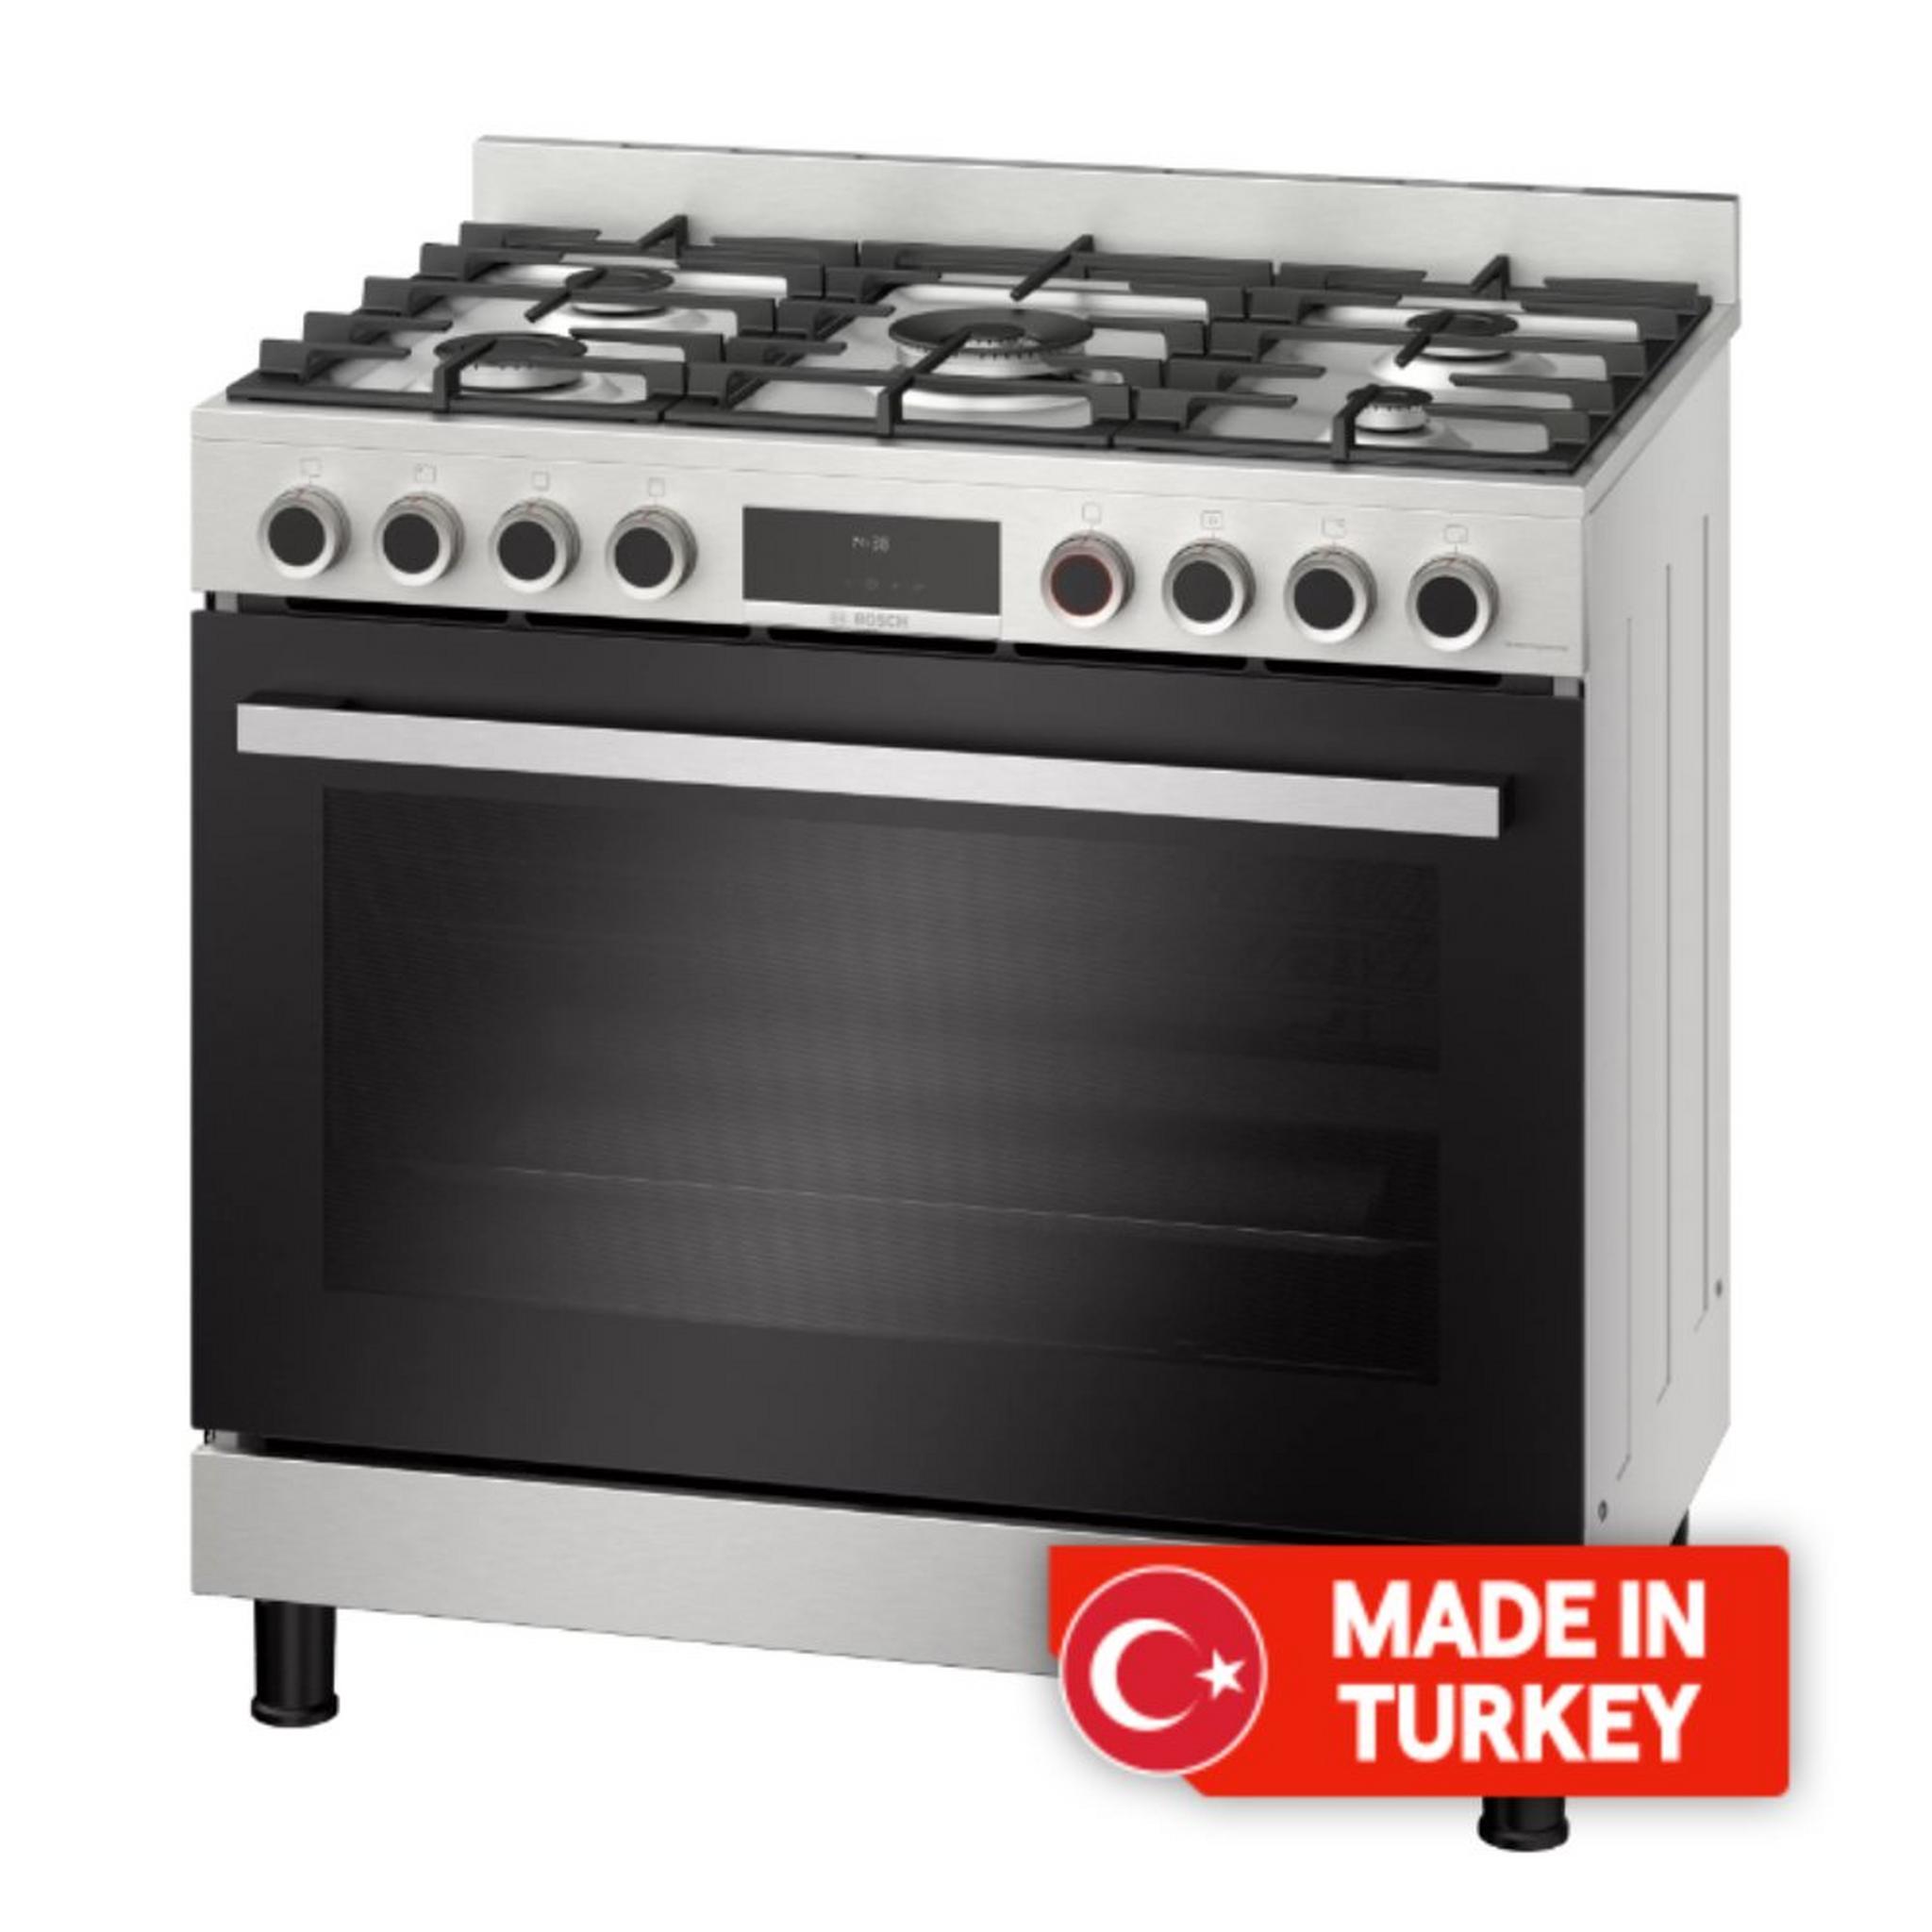 Bosch 5 Burners Gas Cooker, 90x60, HIZ5G7W50M - Stainless Steel